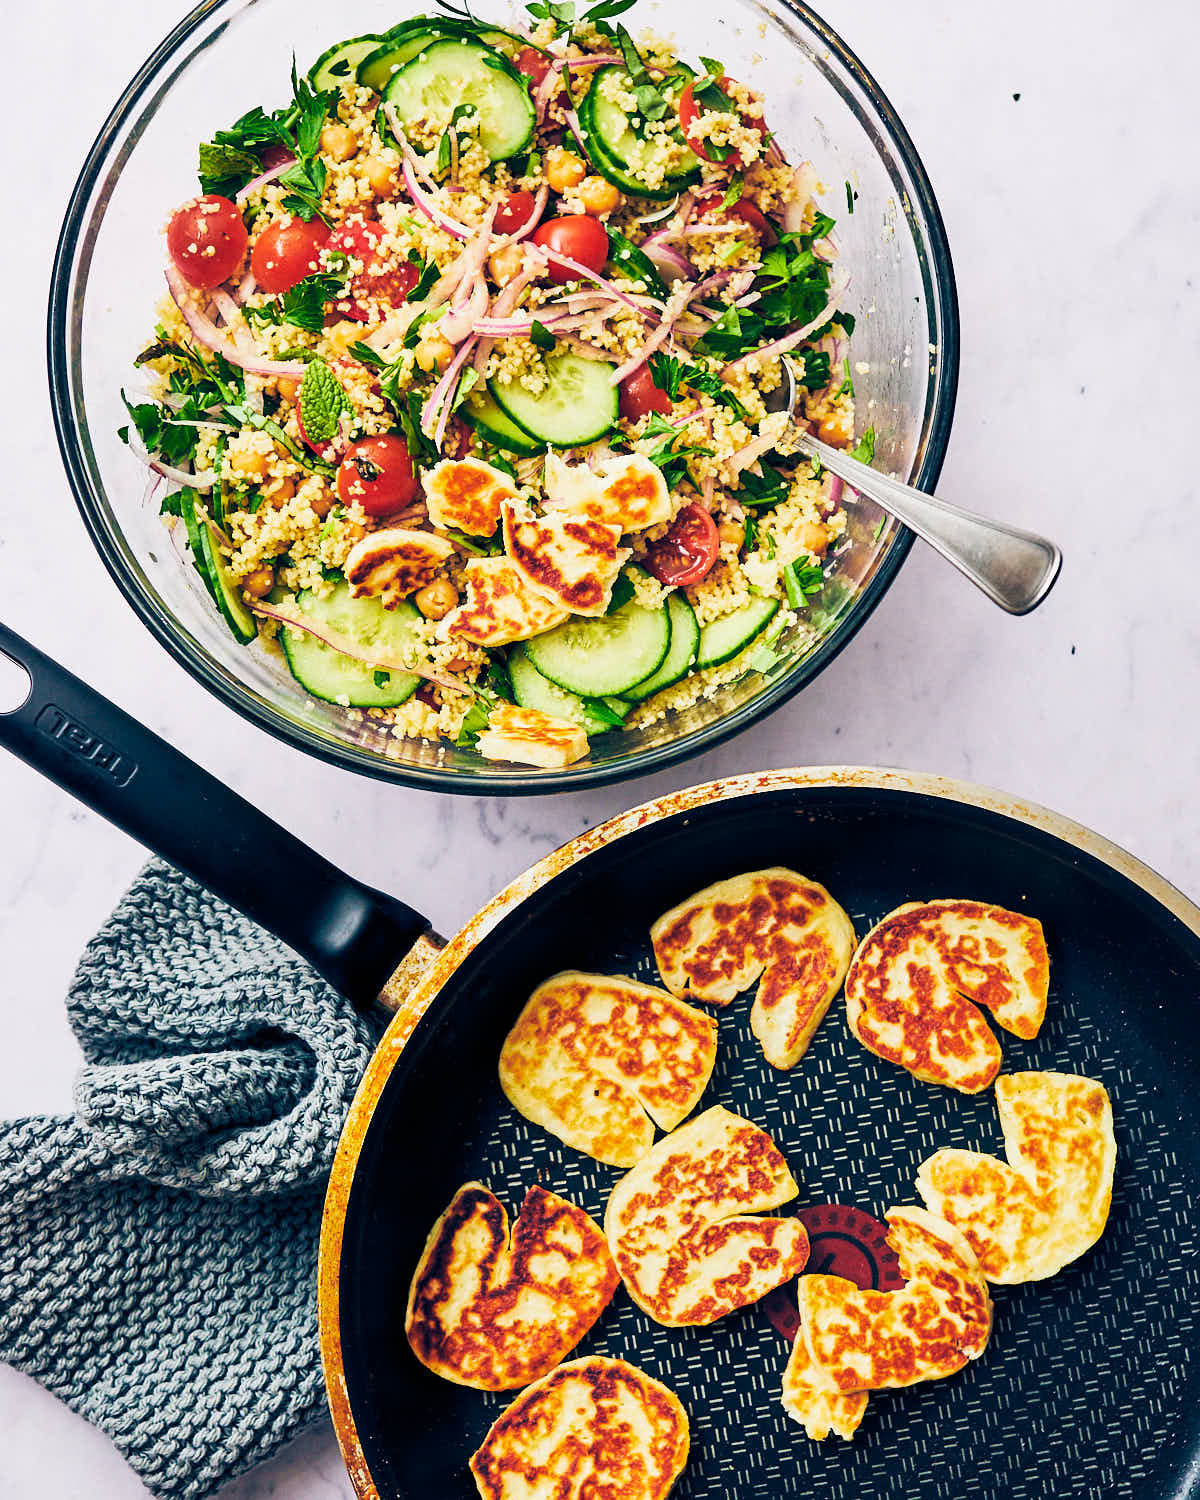 A skillet of seared halloumi, being added to a serving bowl of Halloumi Couscous Salad with Lemon.